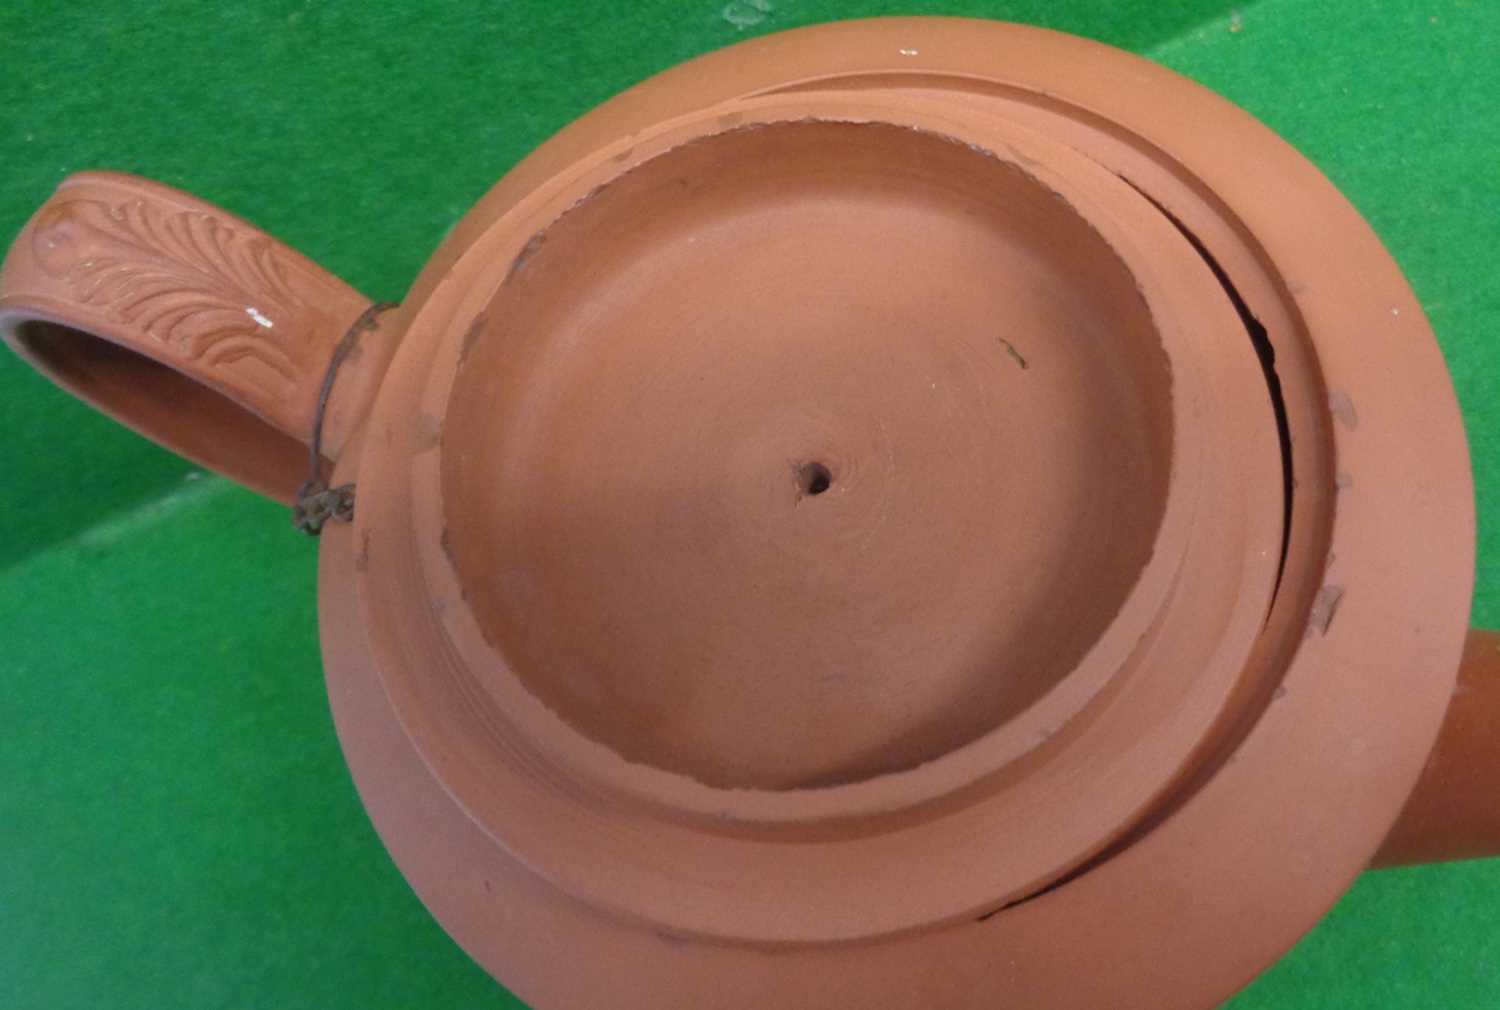 18th century English red ware teapot - Image 4 of 7